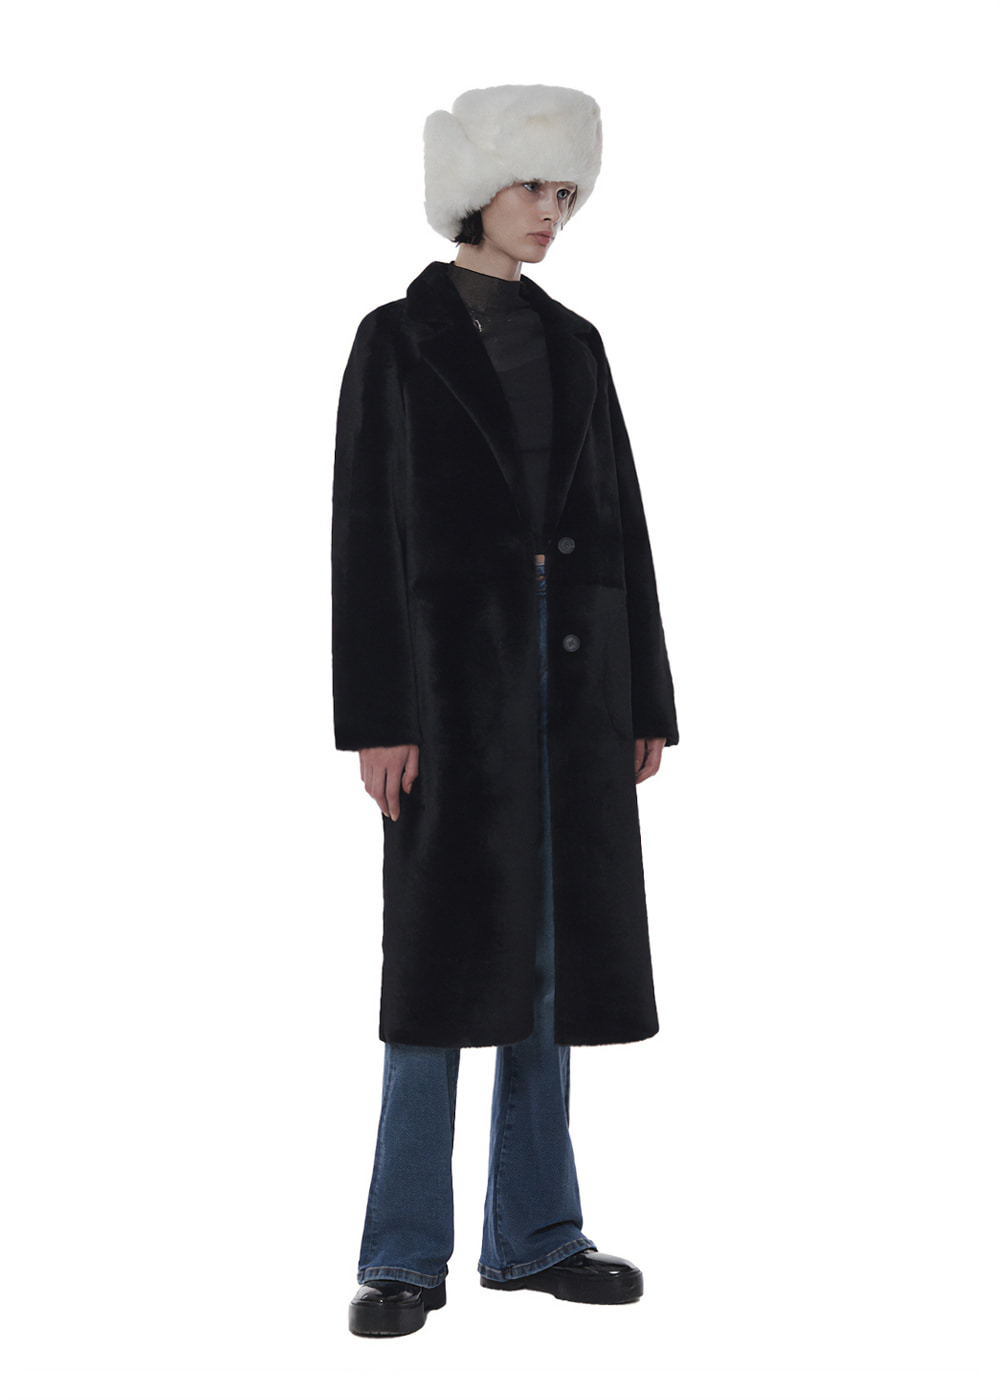 Merino Tailored Collar Long Sheraling Coat BlackMaterial Spanish MerinoPrice 3,890,000This is a long searing coat made of Merino material that is light, soft with a tailored collar.